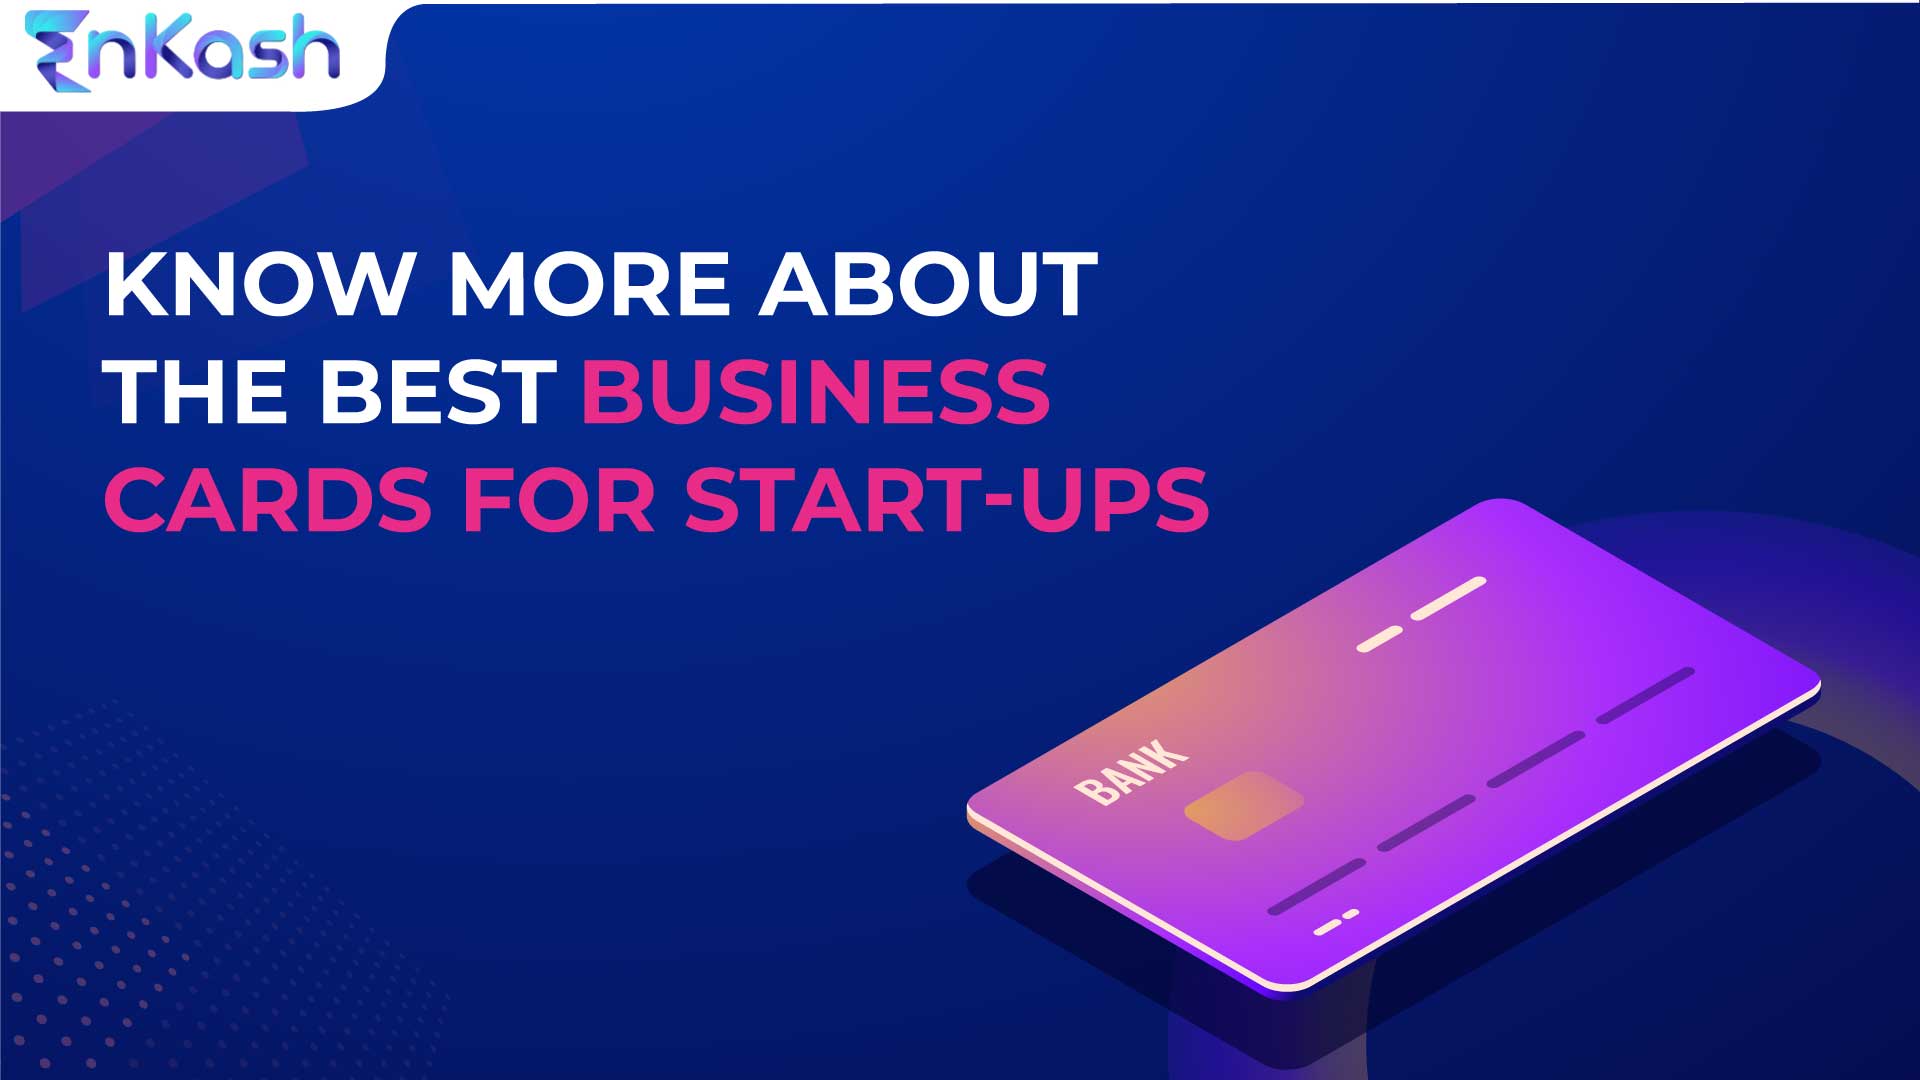 Know more about the best business cards for startups